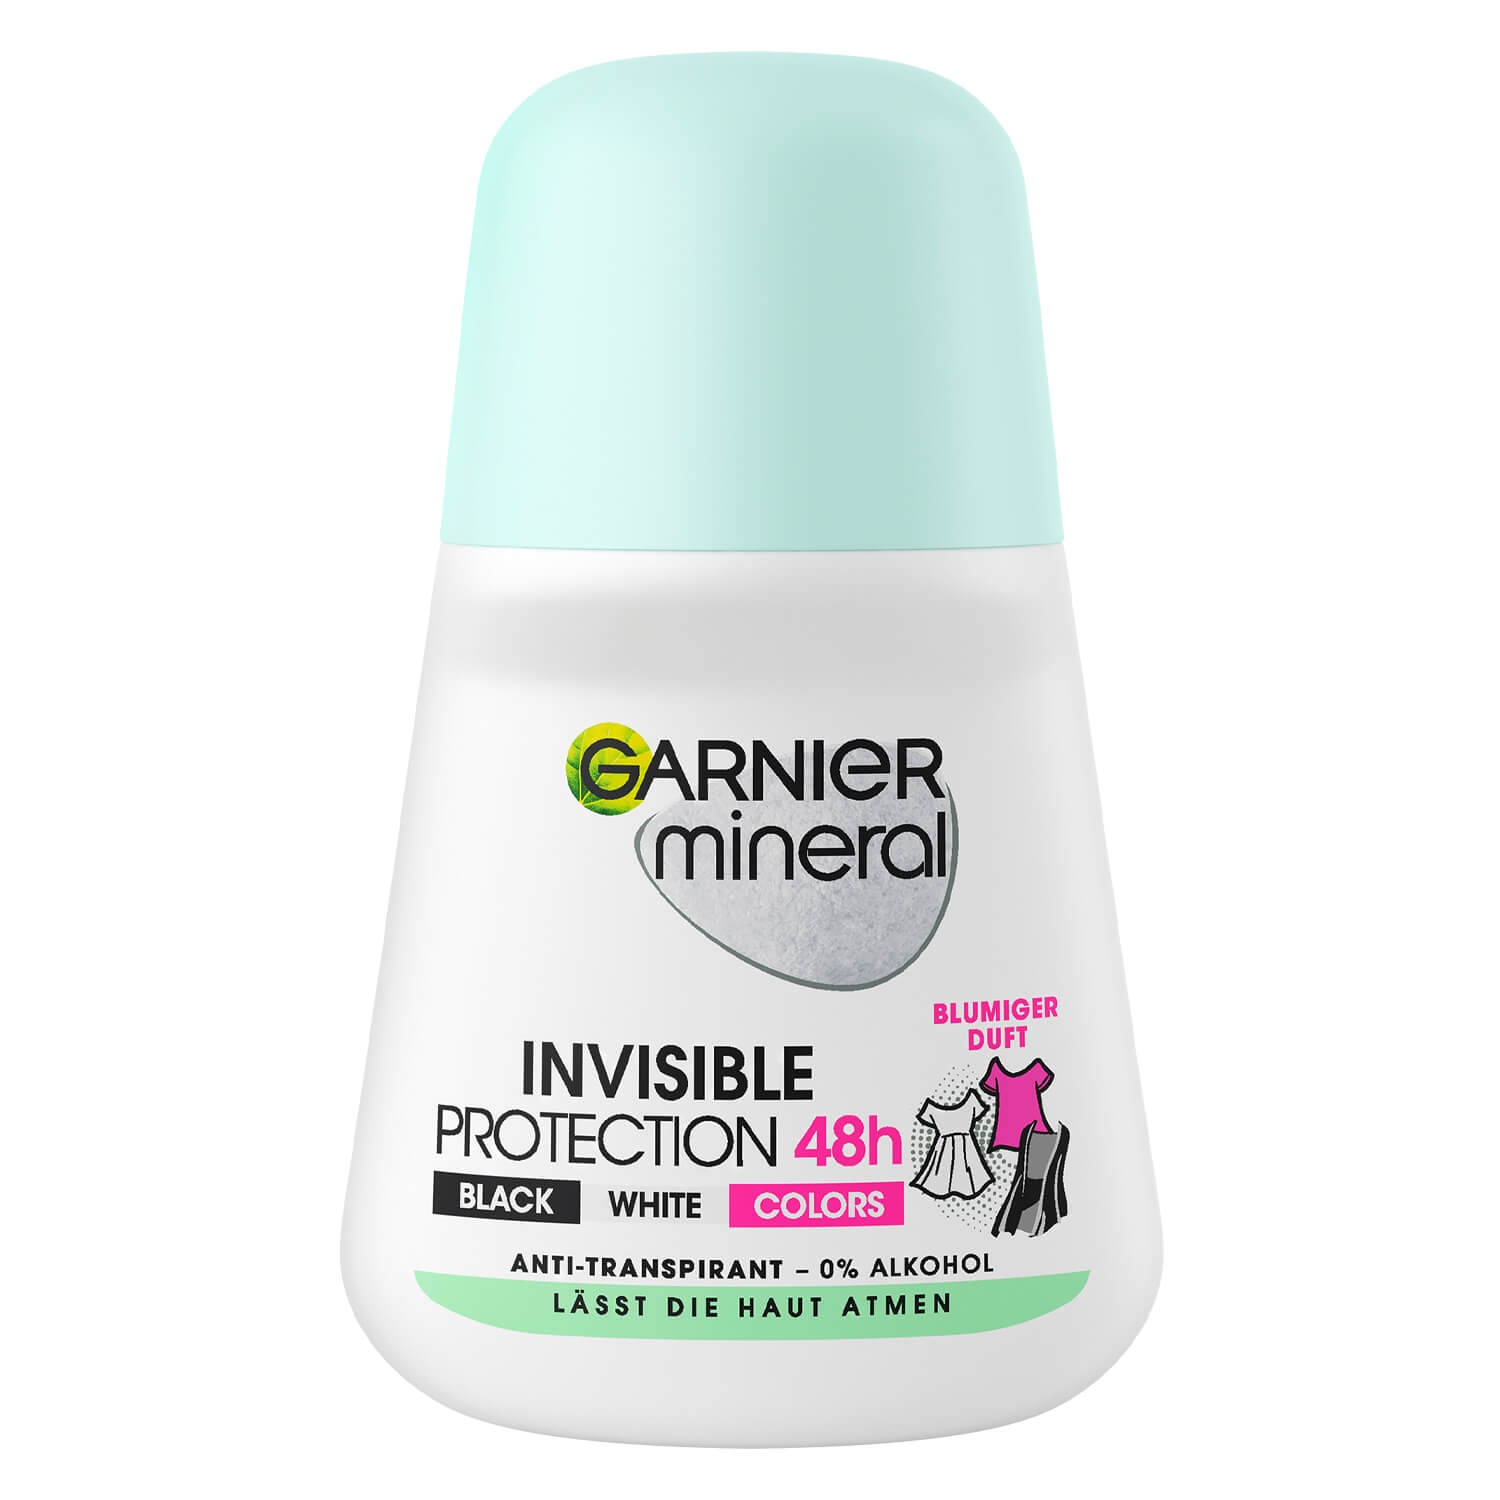 Product image from Garnier Mineral - Invisible Black, White & Colors Roll-on